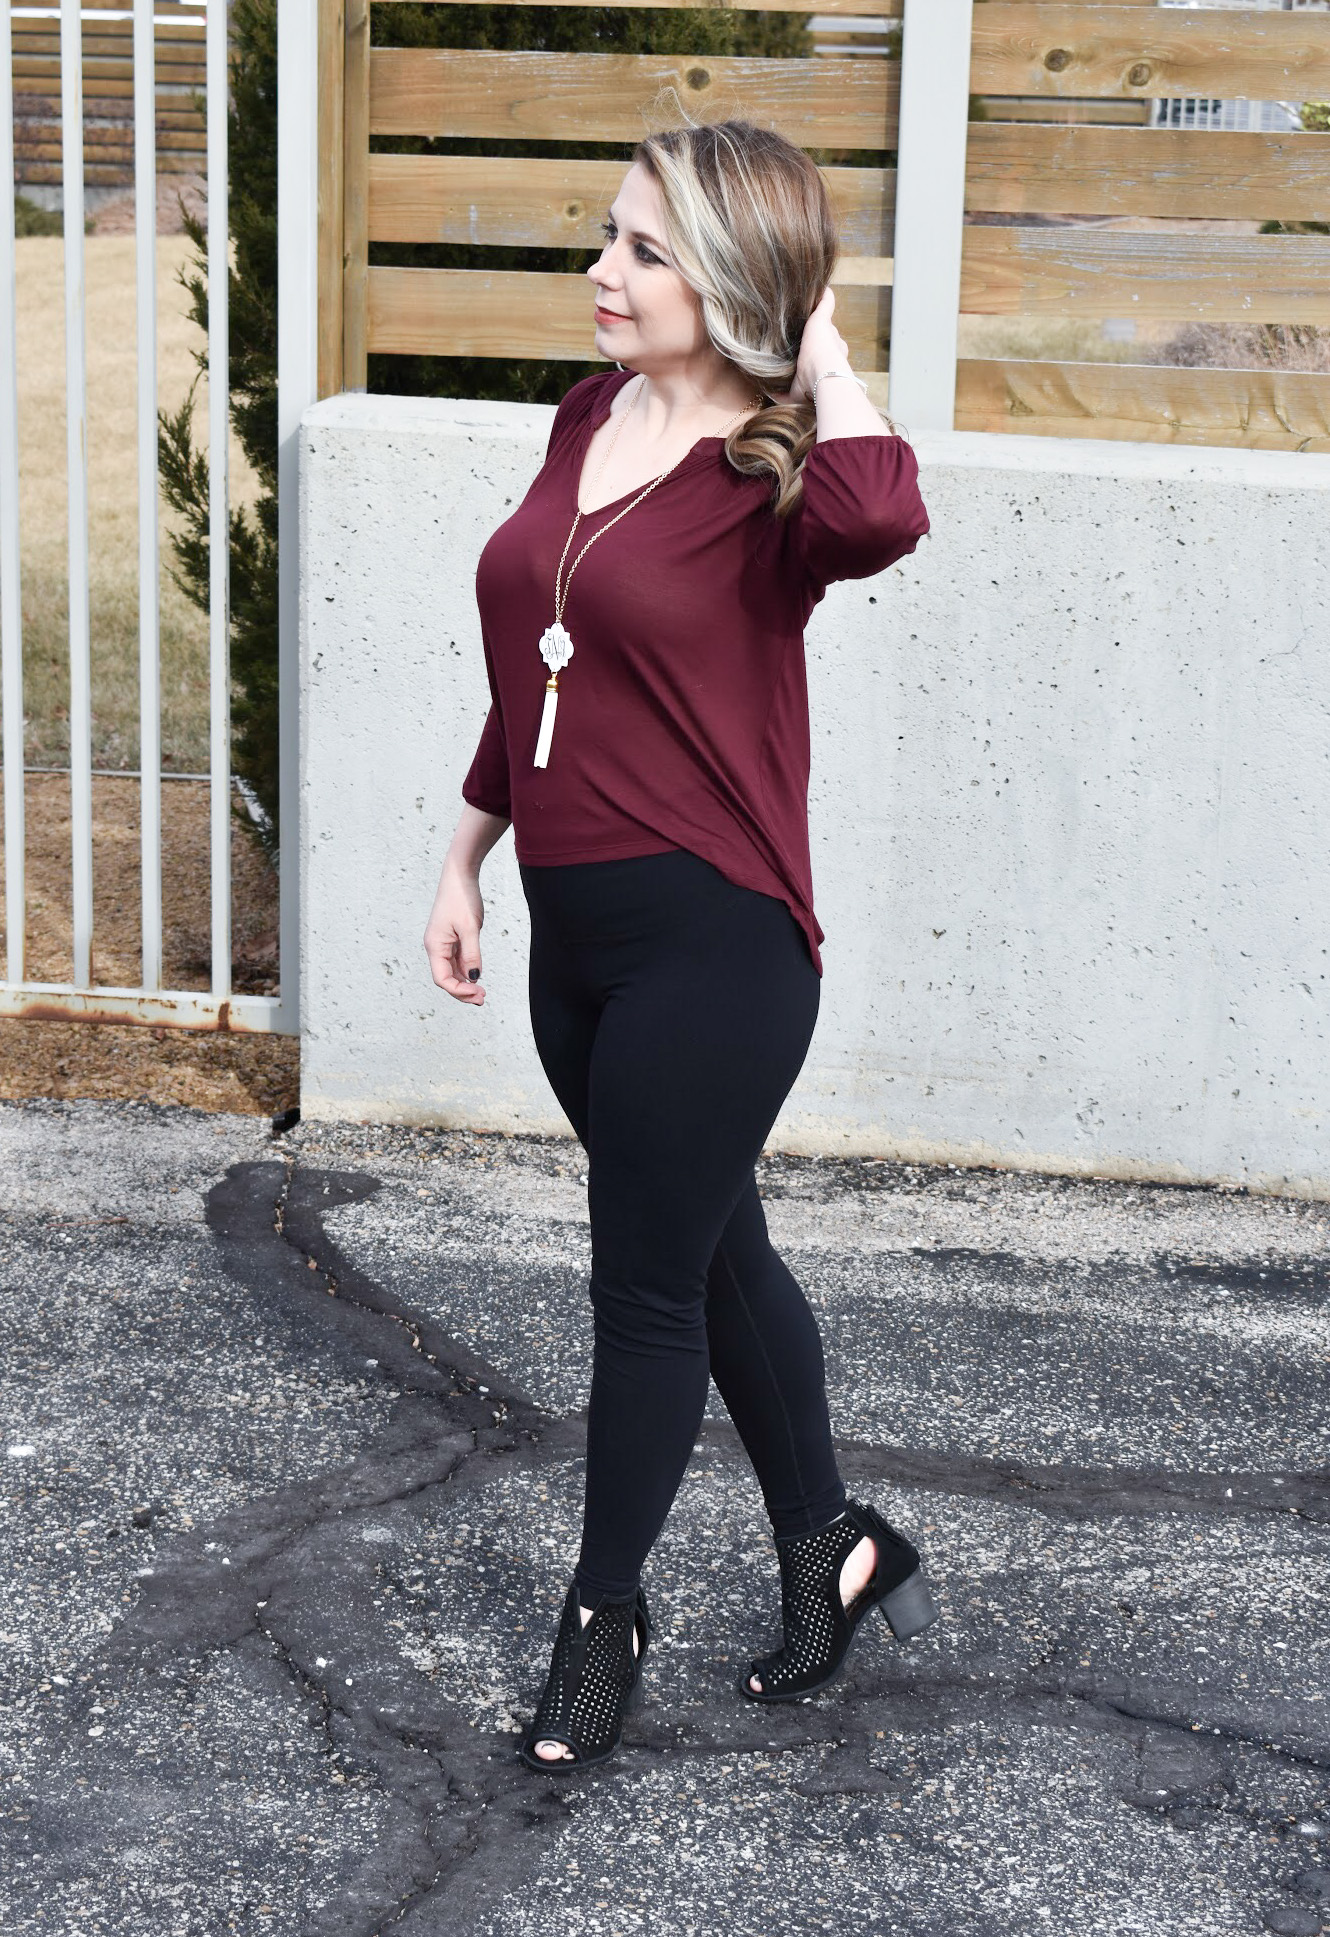 Dresses to wear leggings with - leggings with dresses | 40+style